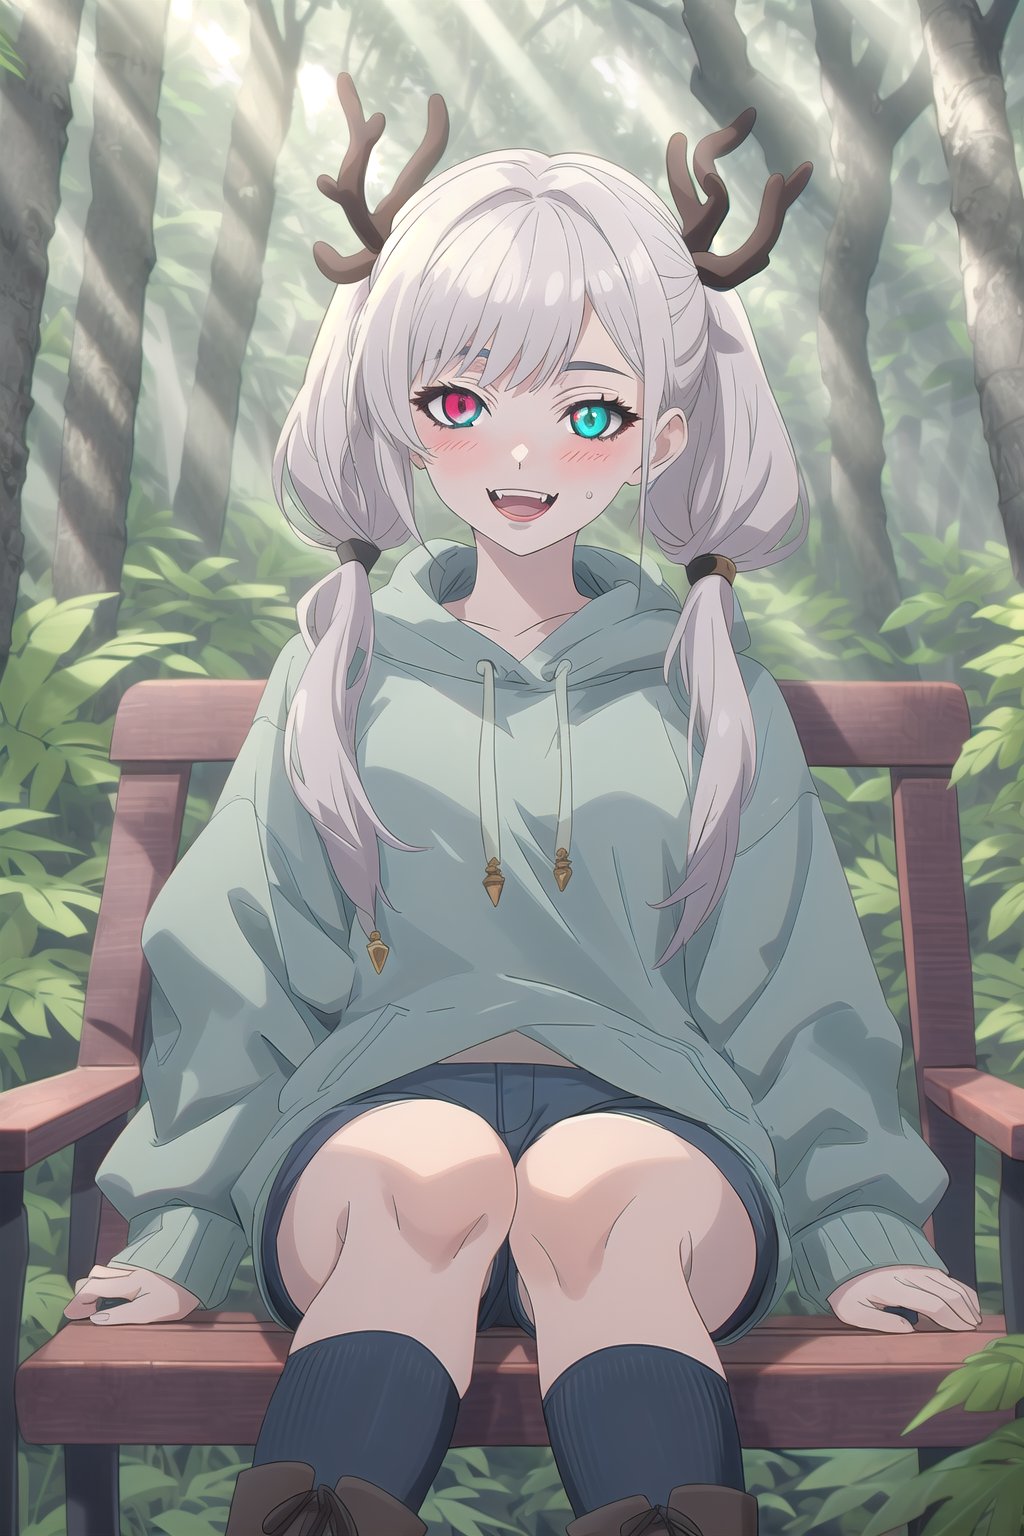 nier anime style illustration, best quality, masterpiece High resolution, good detail, bright colors, HDR, 4K. Dolby vision high.

Albino deer girl with long straight hair, long pigtails, blushing. Heterochromia (one blue eye, one red eye). 

Gray steampunk sweatshirt 

Medieval fantasy style denim shorts 

black stockings 

Gray ankle boots 

Forest with leafy trees

waterfalls 

Intense rays of sun between the trees. 

Sitting in the forest 

Flirty smile (yandere smile). Happy, excited.  Open mouth 

Showing fangs, exposed fangs.

selfie pose 

Sunrise 

deer girl